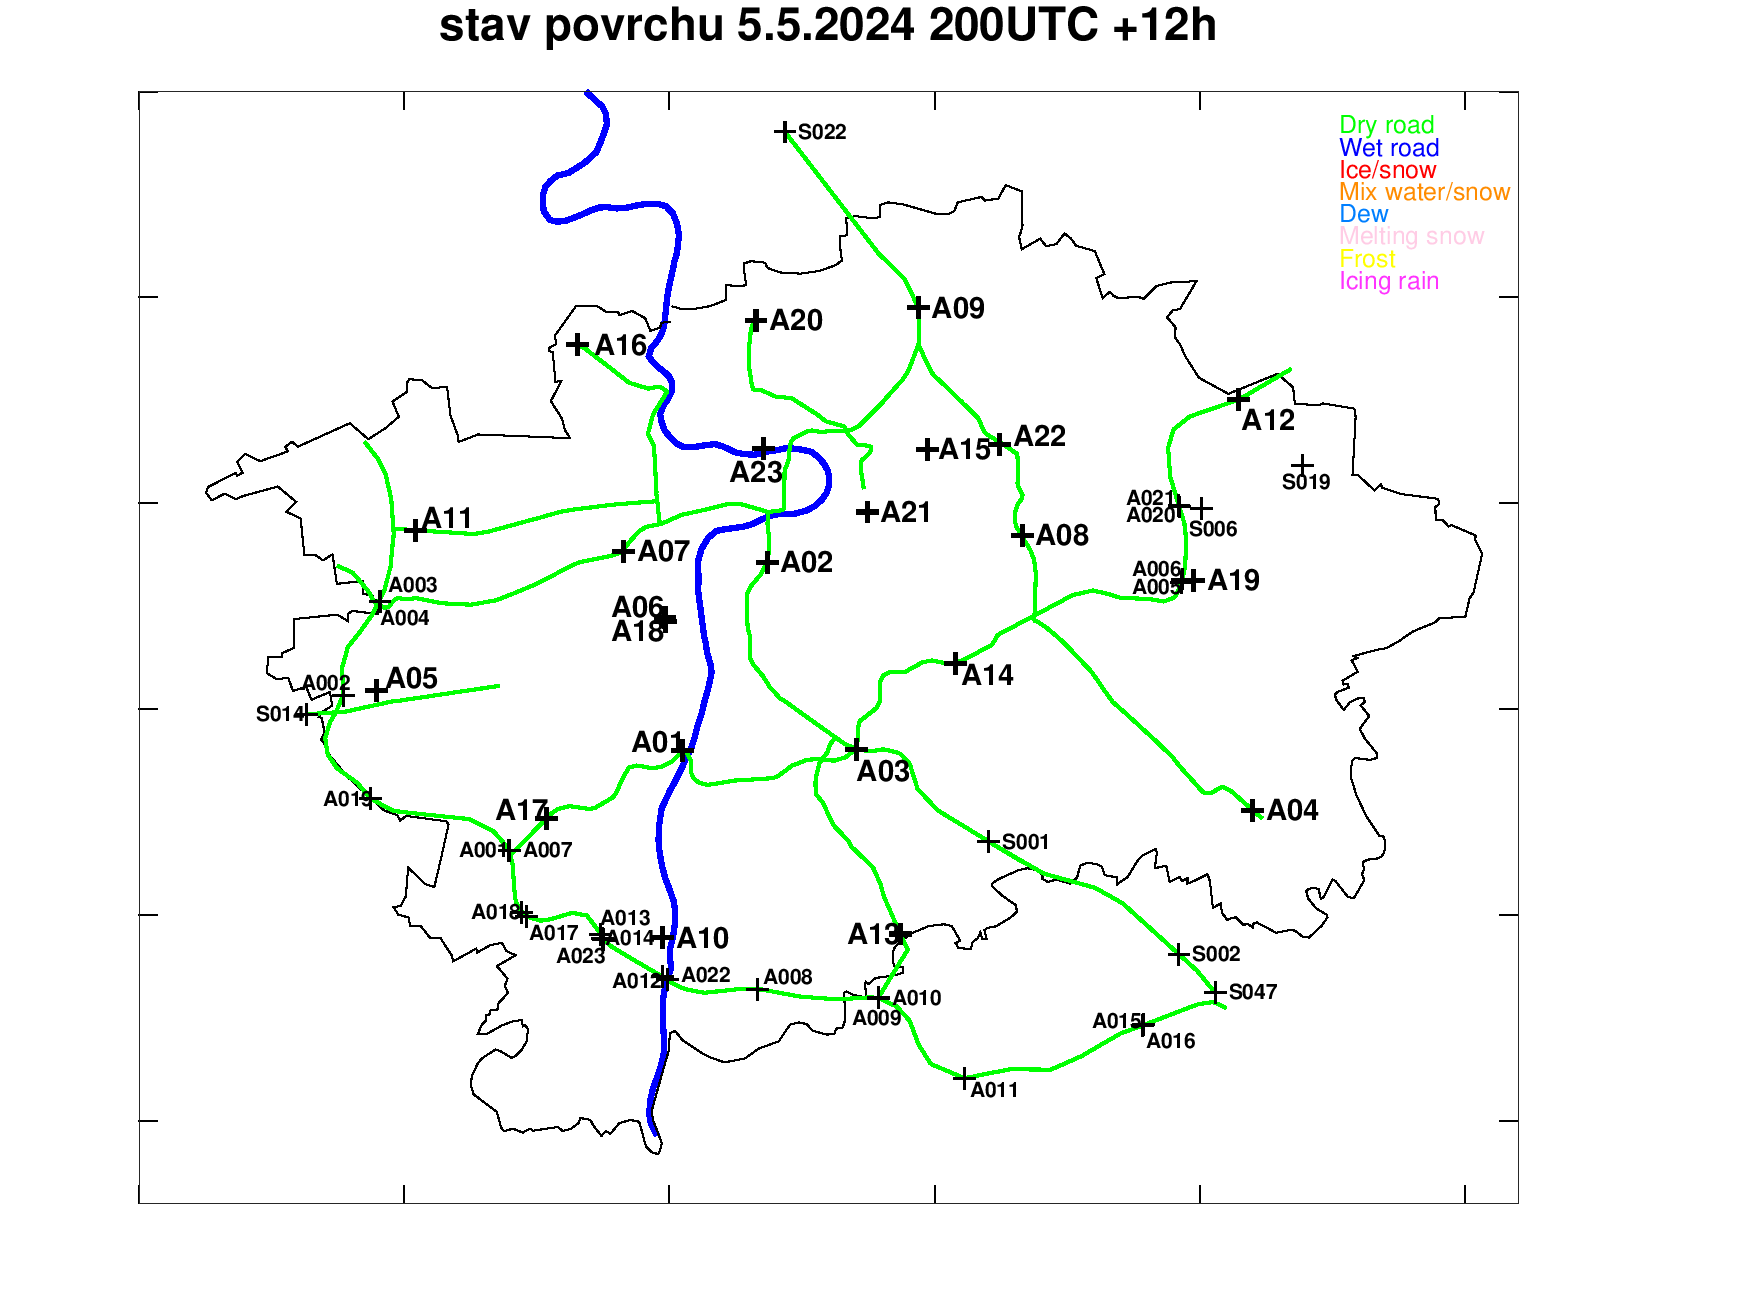 Road surface condition forecast for Pragu +12h